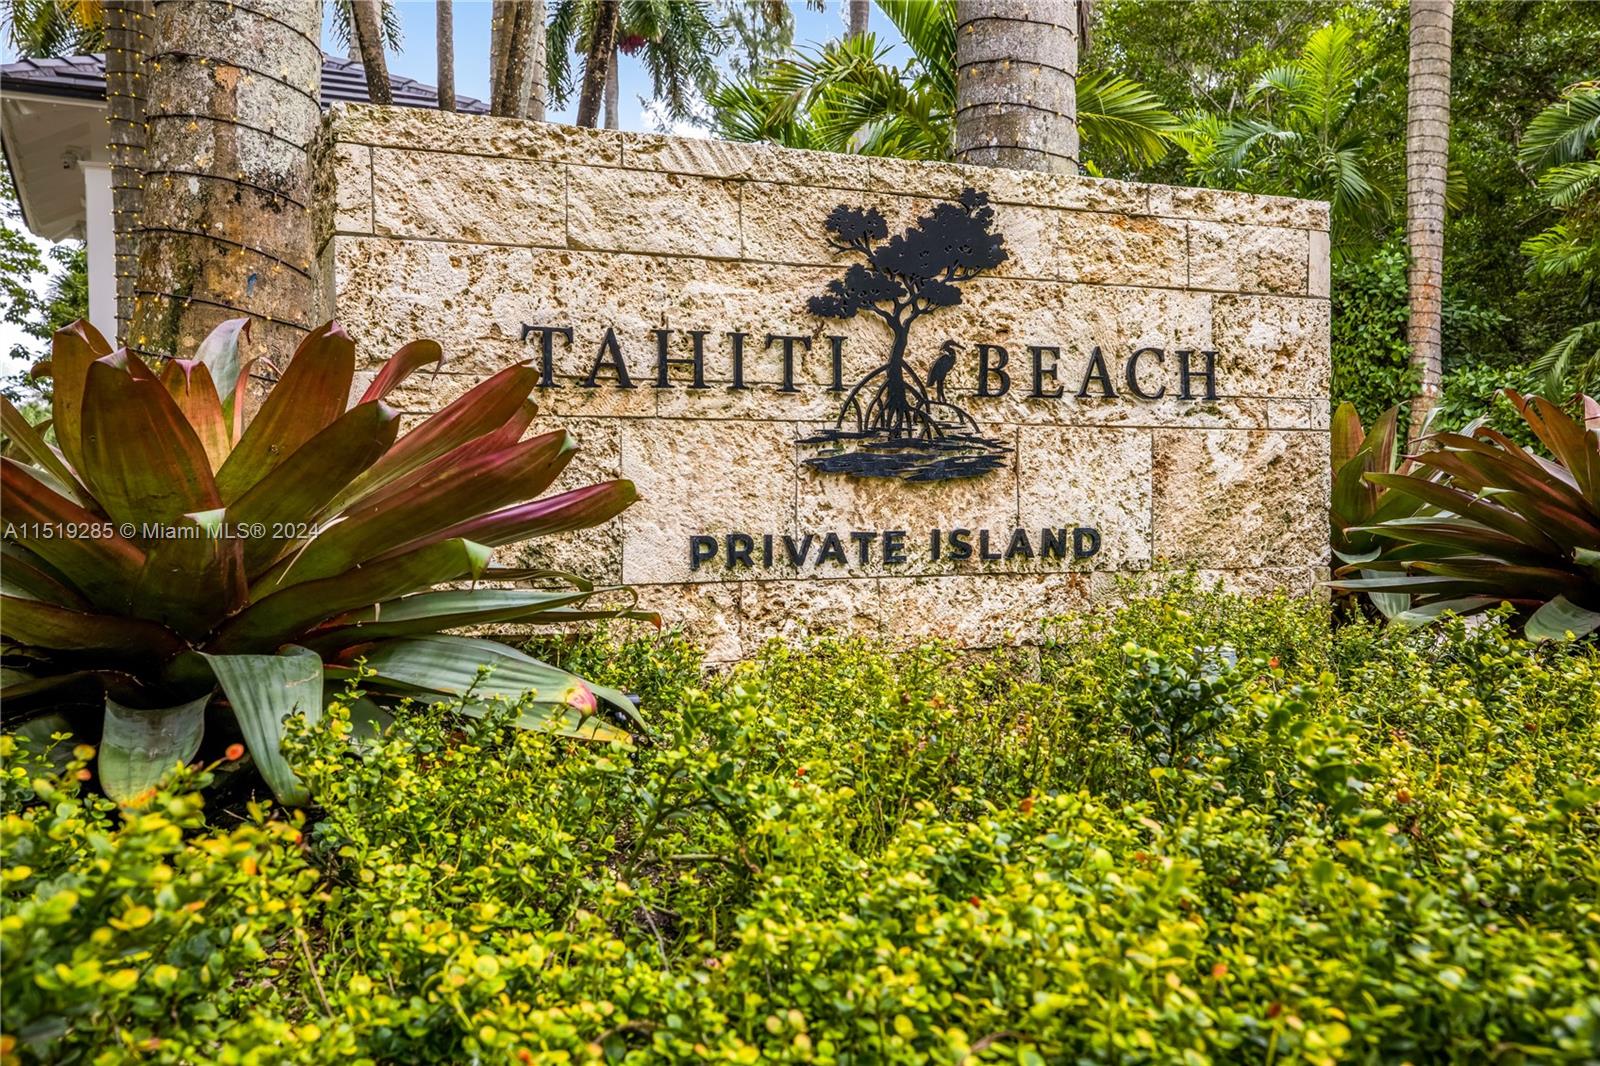 If privacy, security & value-add potential are prime criteria, this is the only property available in exclusive, guarded Tahiti Beach Island of only 29 acre-homesites on Biscayne Bay. Located at the eastern-most edge of Islands Cocoplum, the Palm lined drive & mature landscaping opens to a gracious home w significant updates in 2015-2018 (incl Marvin impact, roof).A wrought iron enclosed terrace opens to gorgeous grounds, salt water pool, pergola,2 Koi ponds,spa,Oolite trails, expansive lawn & Oolite stone wall along preserve. Floor plan feat 1 bdrm & 2 ½ bthrs &  wood paneled office downstairs, upstairs family room and 5 bdrms/4 bath. 2 Bonus red-brick-lined, plank floor wine cellars. Enjoy residents’ private tennis pavilion, beach park, Bay walk plus Islands of Cocoplum amenities.